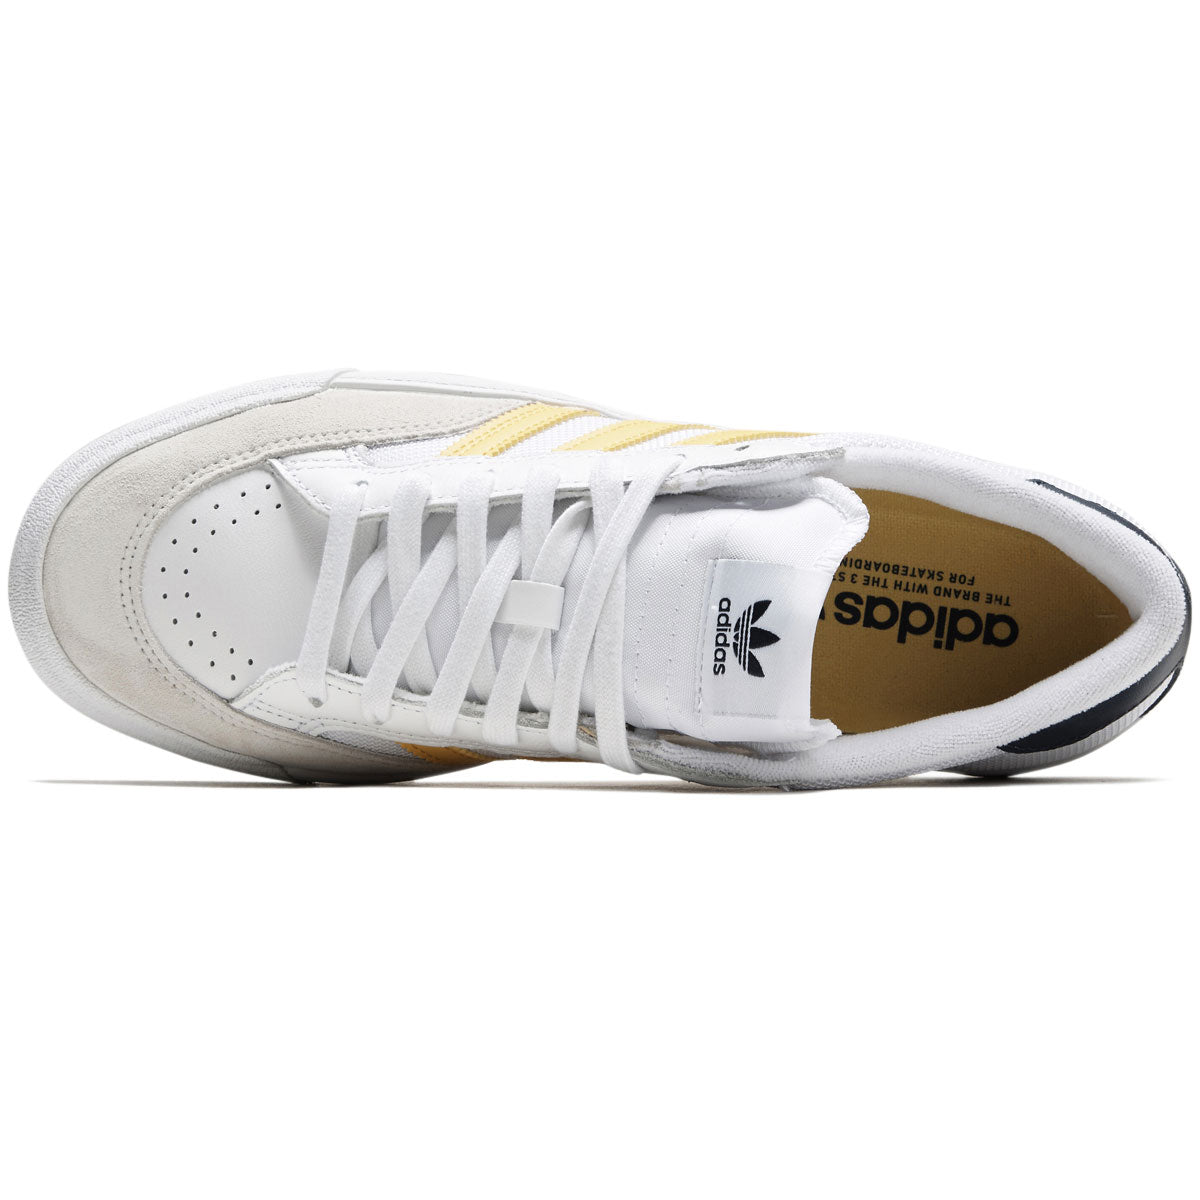 Adidas Nora Shoes - White/Bold Gold/Collegiate Navy – CCS